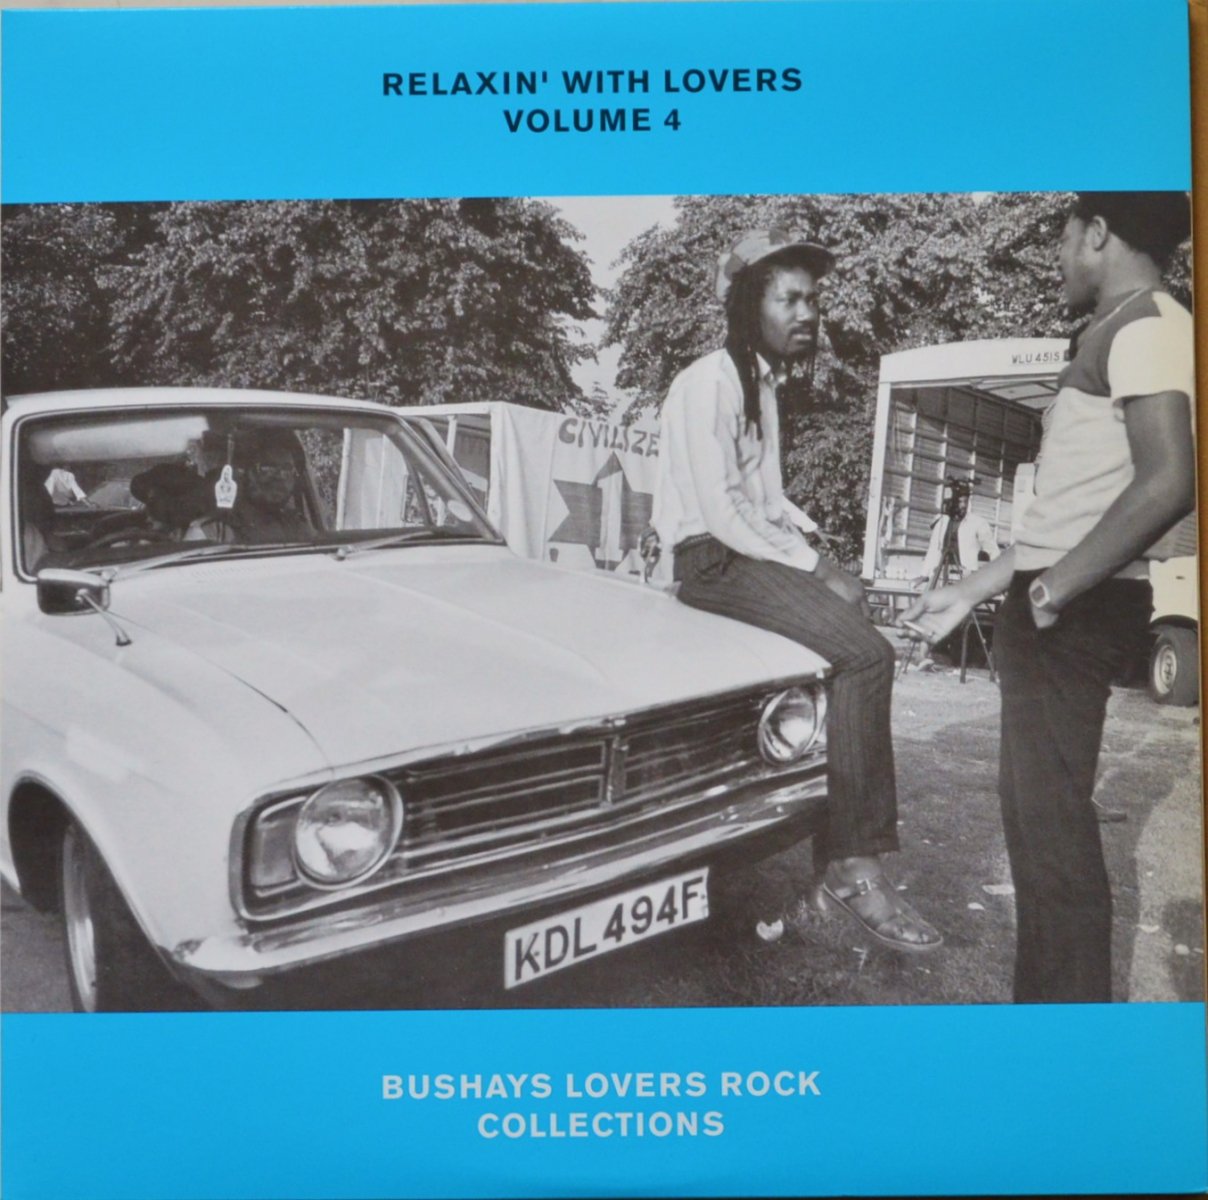 V.A. / RELAXIN WITH LOVERS VOL.4 (2LP) - HIP TANK RECORDS